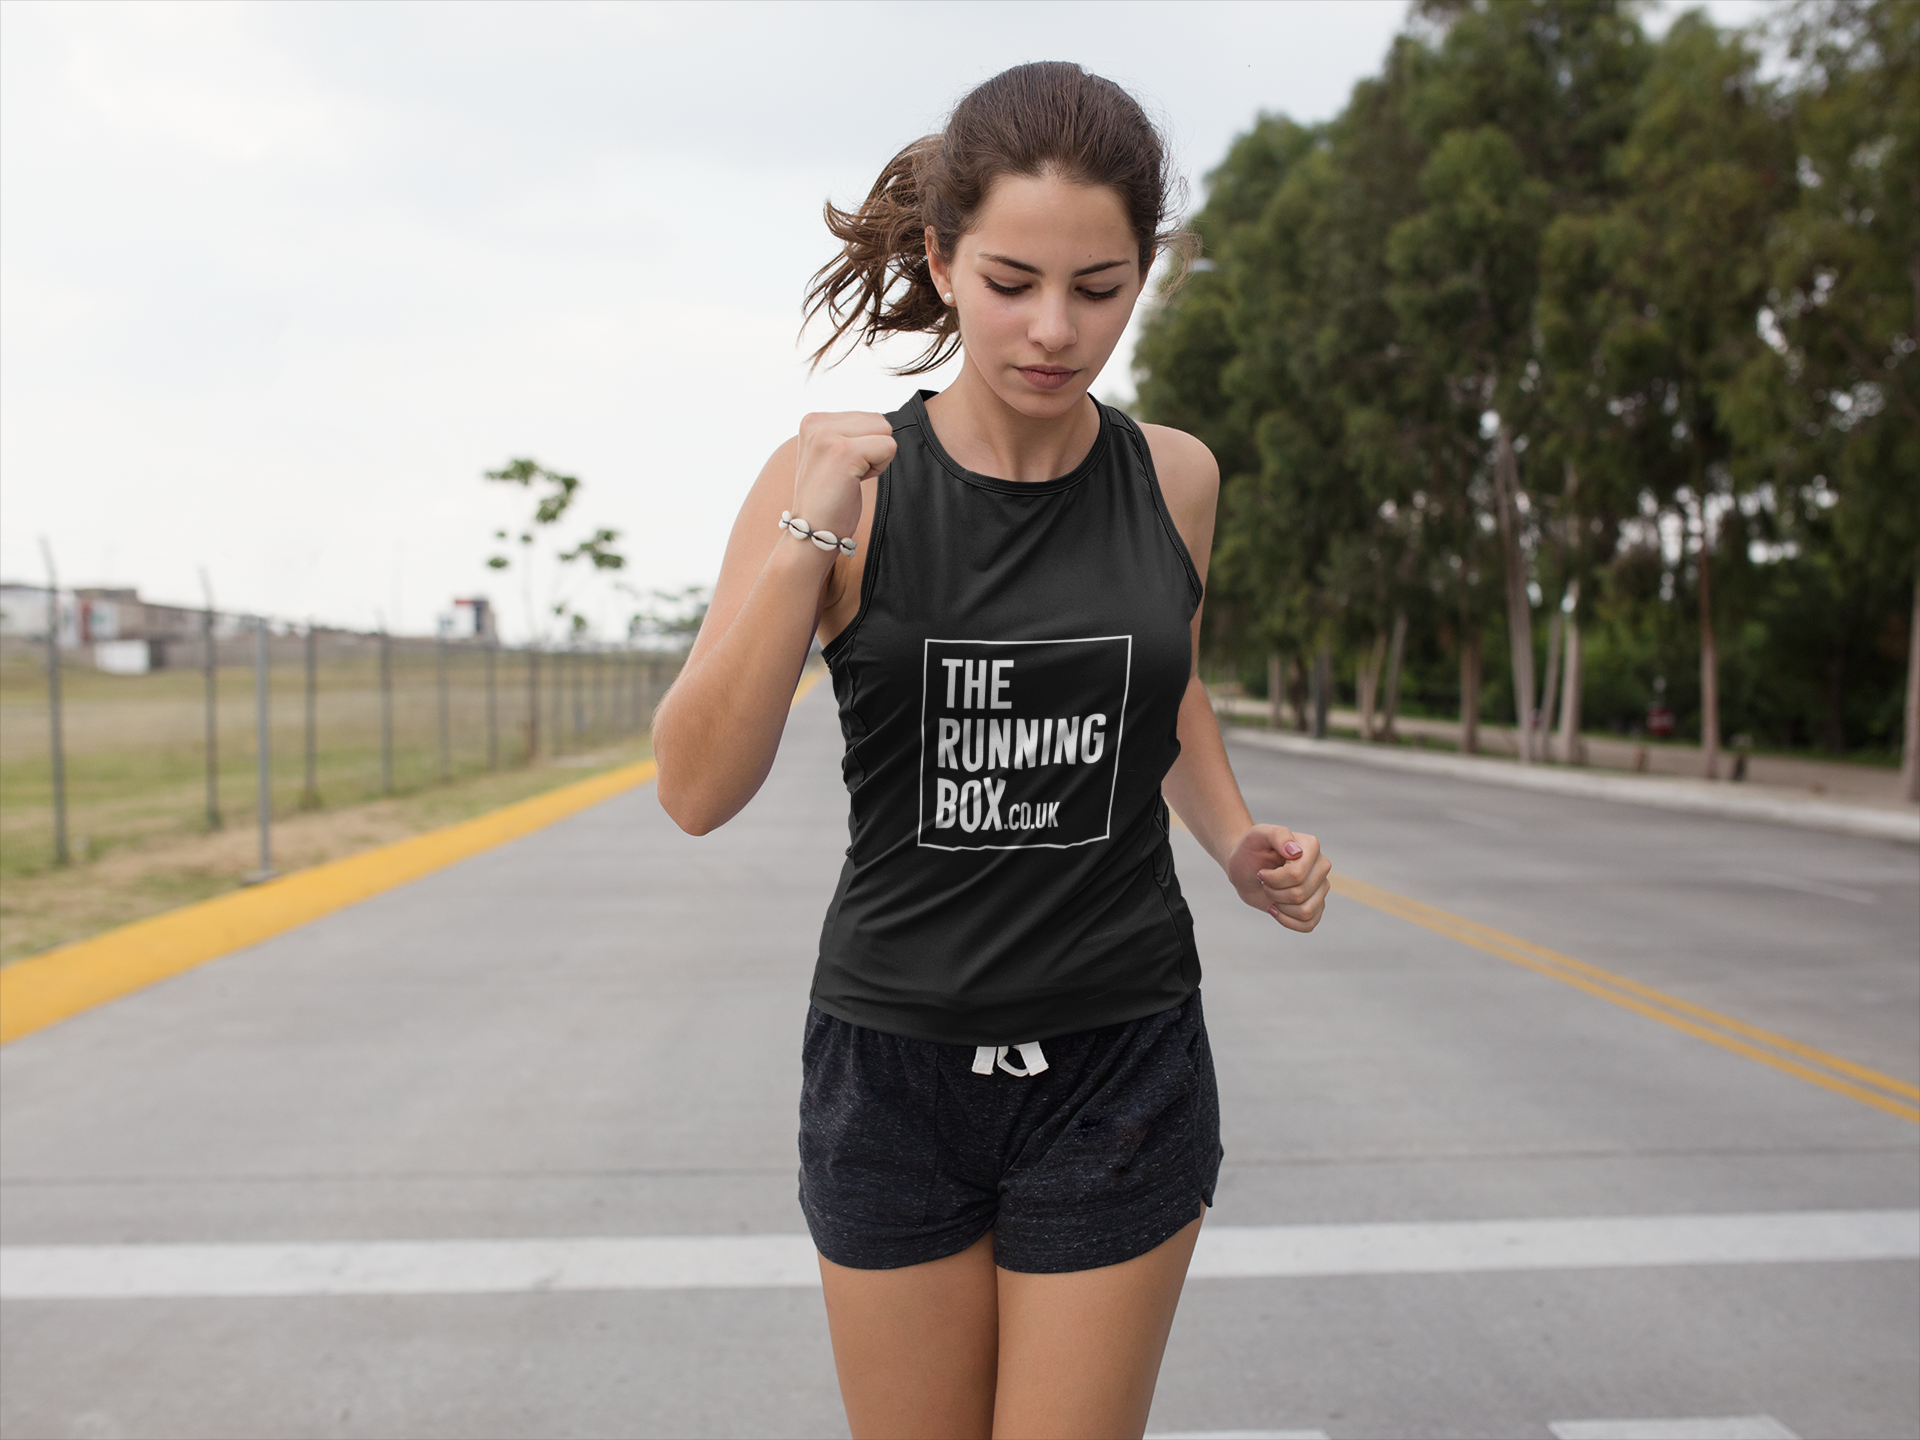 r128-girl-running-on-the-street-wearing-custom-athletic-apparel-mockup-a16862-15875992417945.png